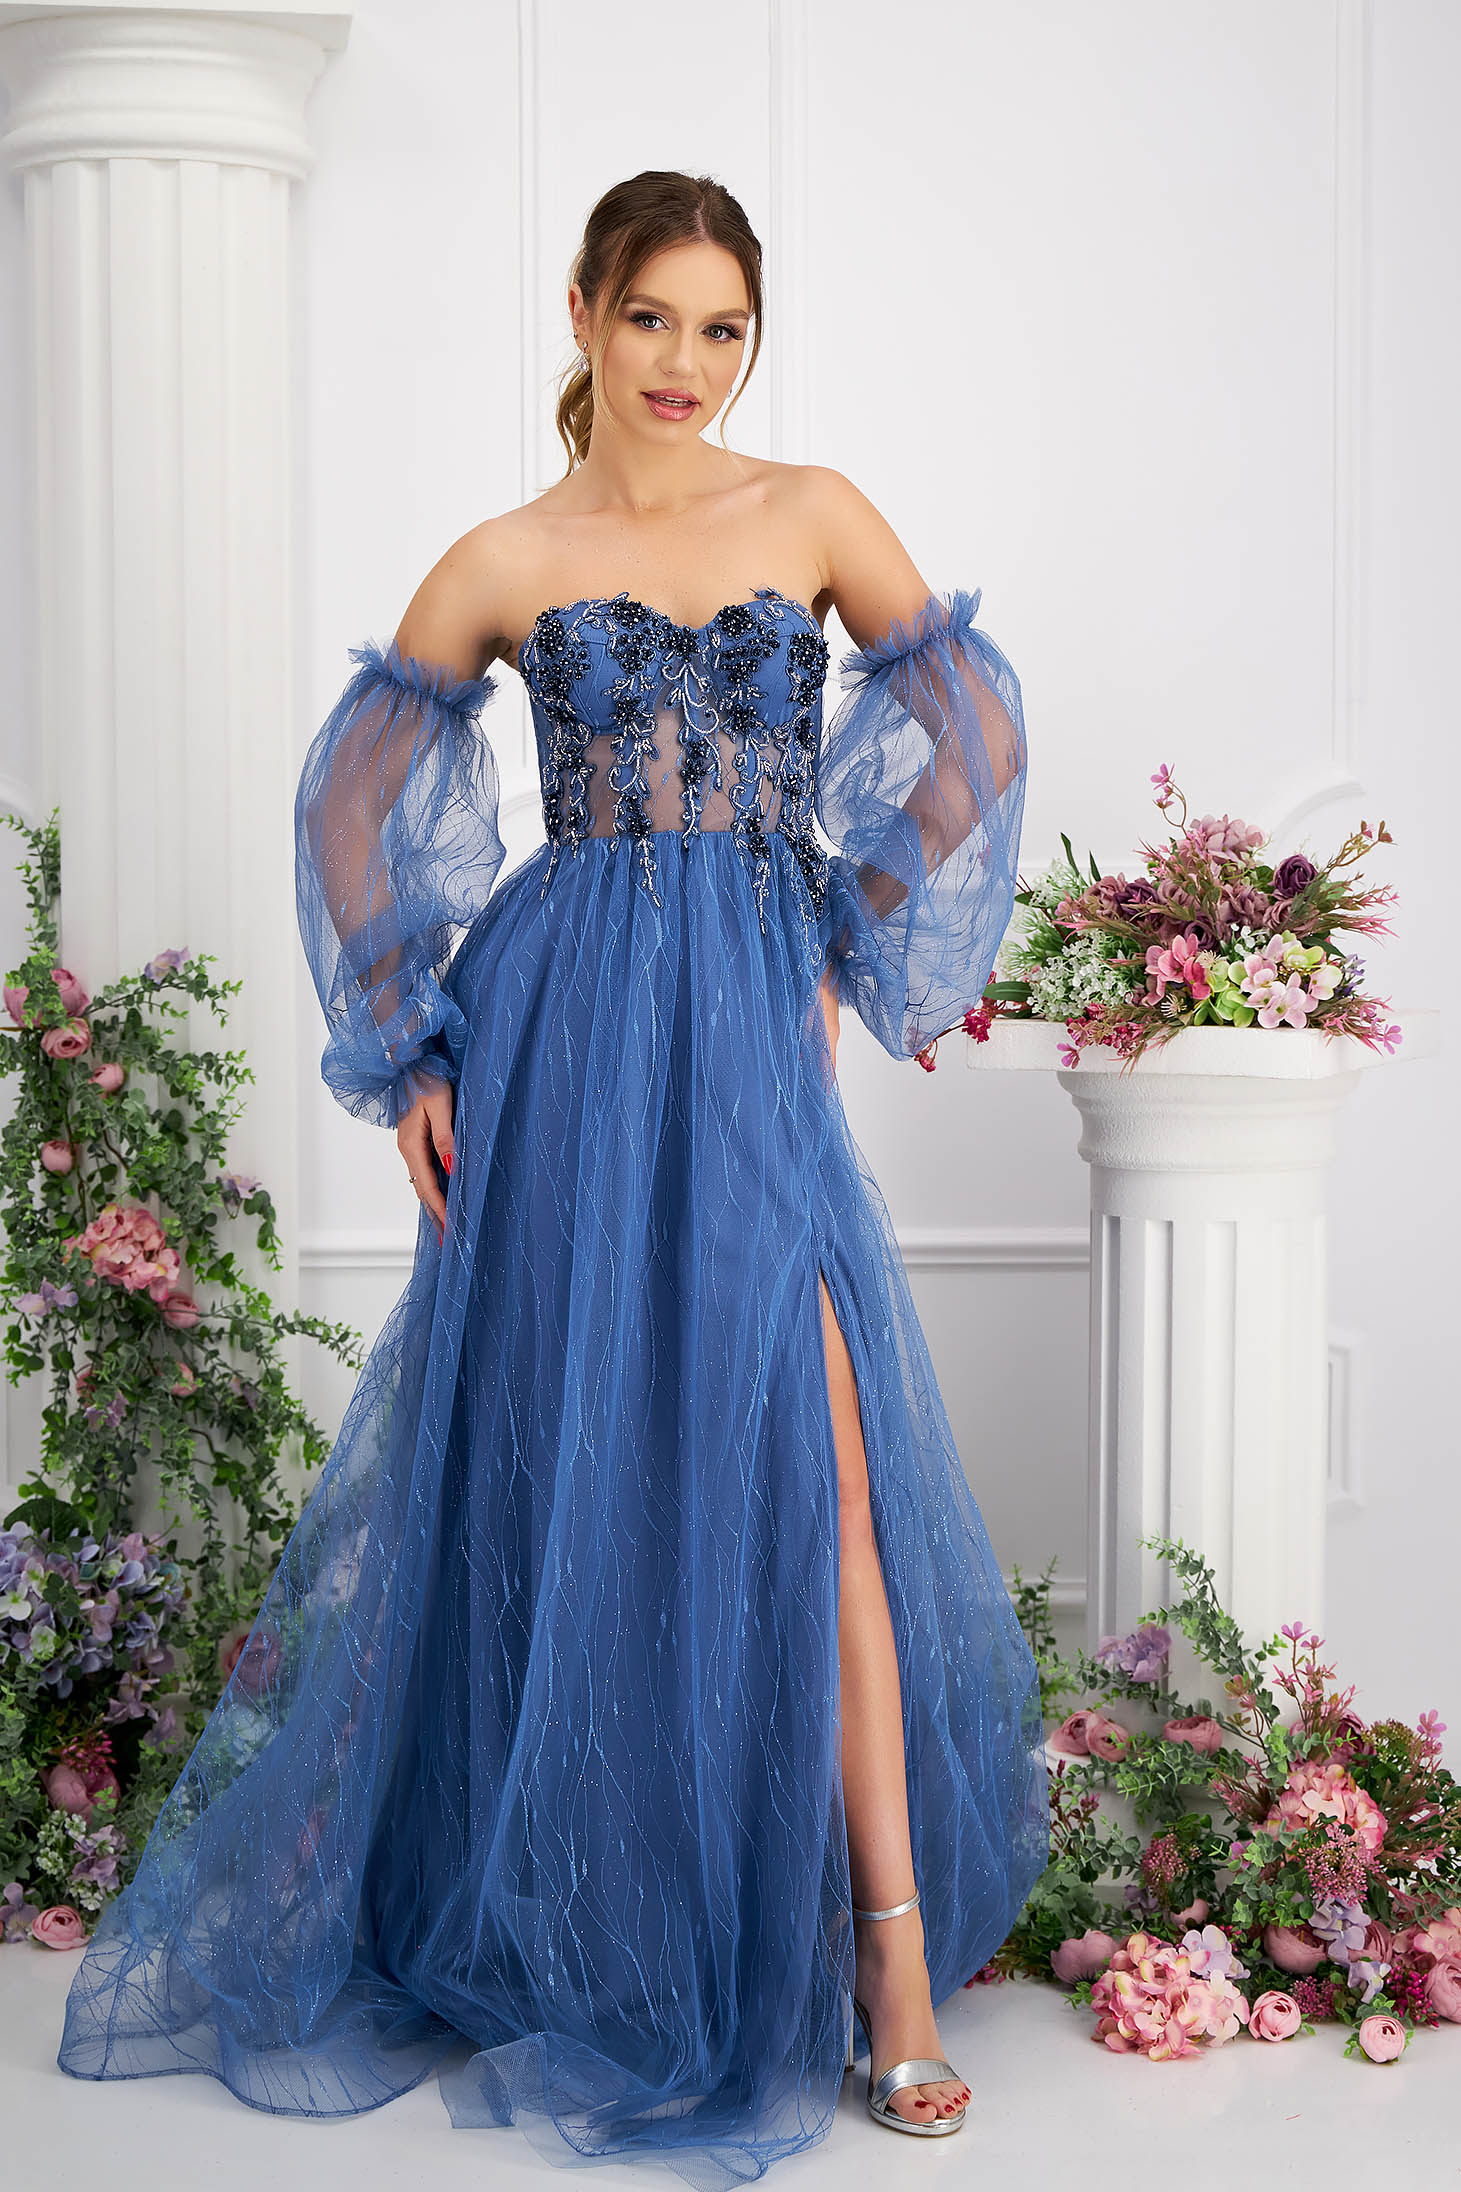 Blue dress from tulle long cloche with puffed sleeves lace and crystal embellished details